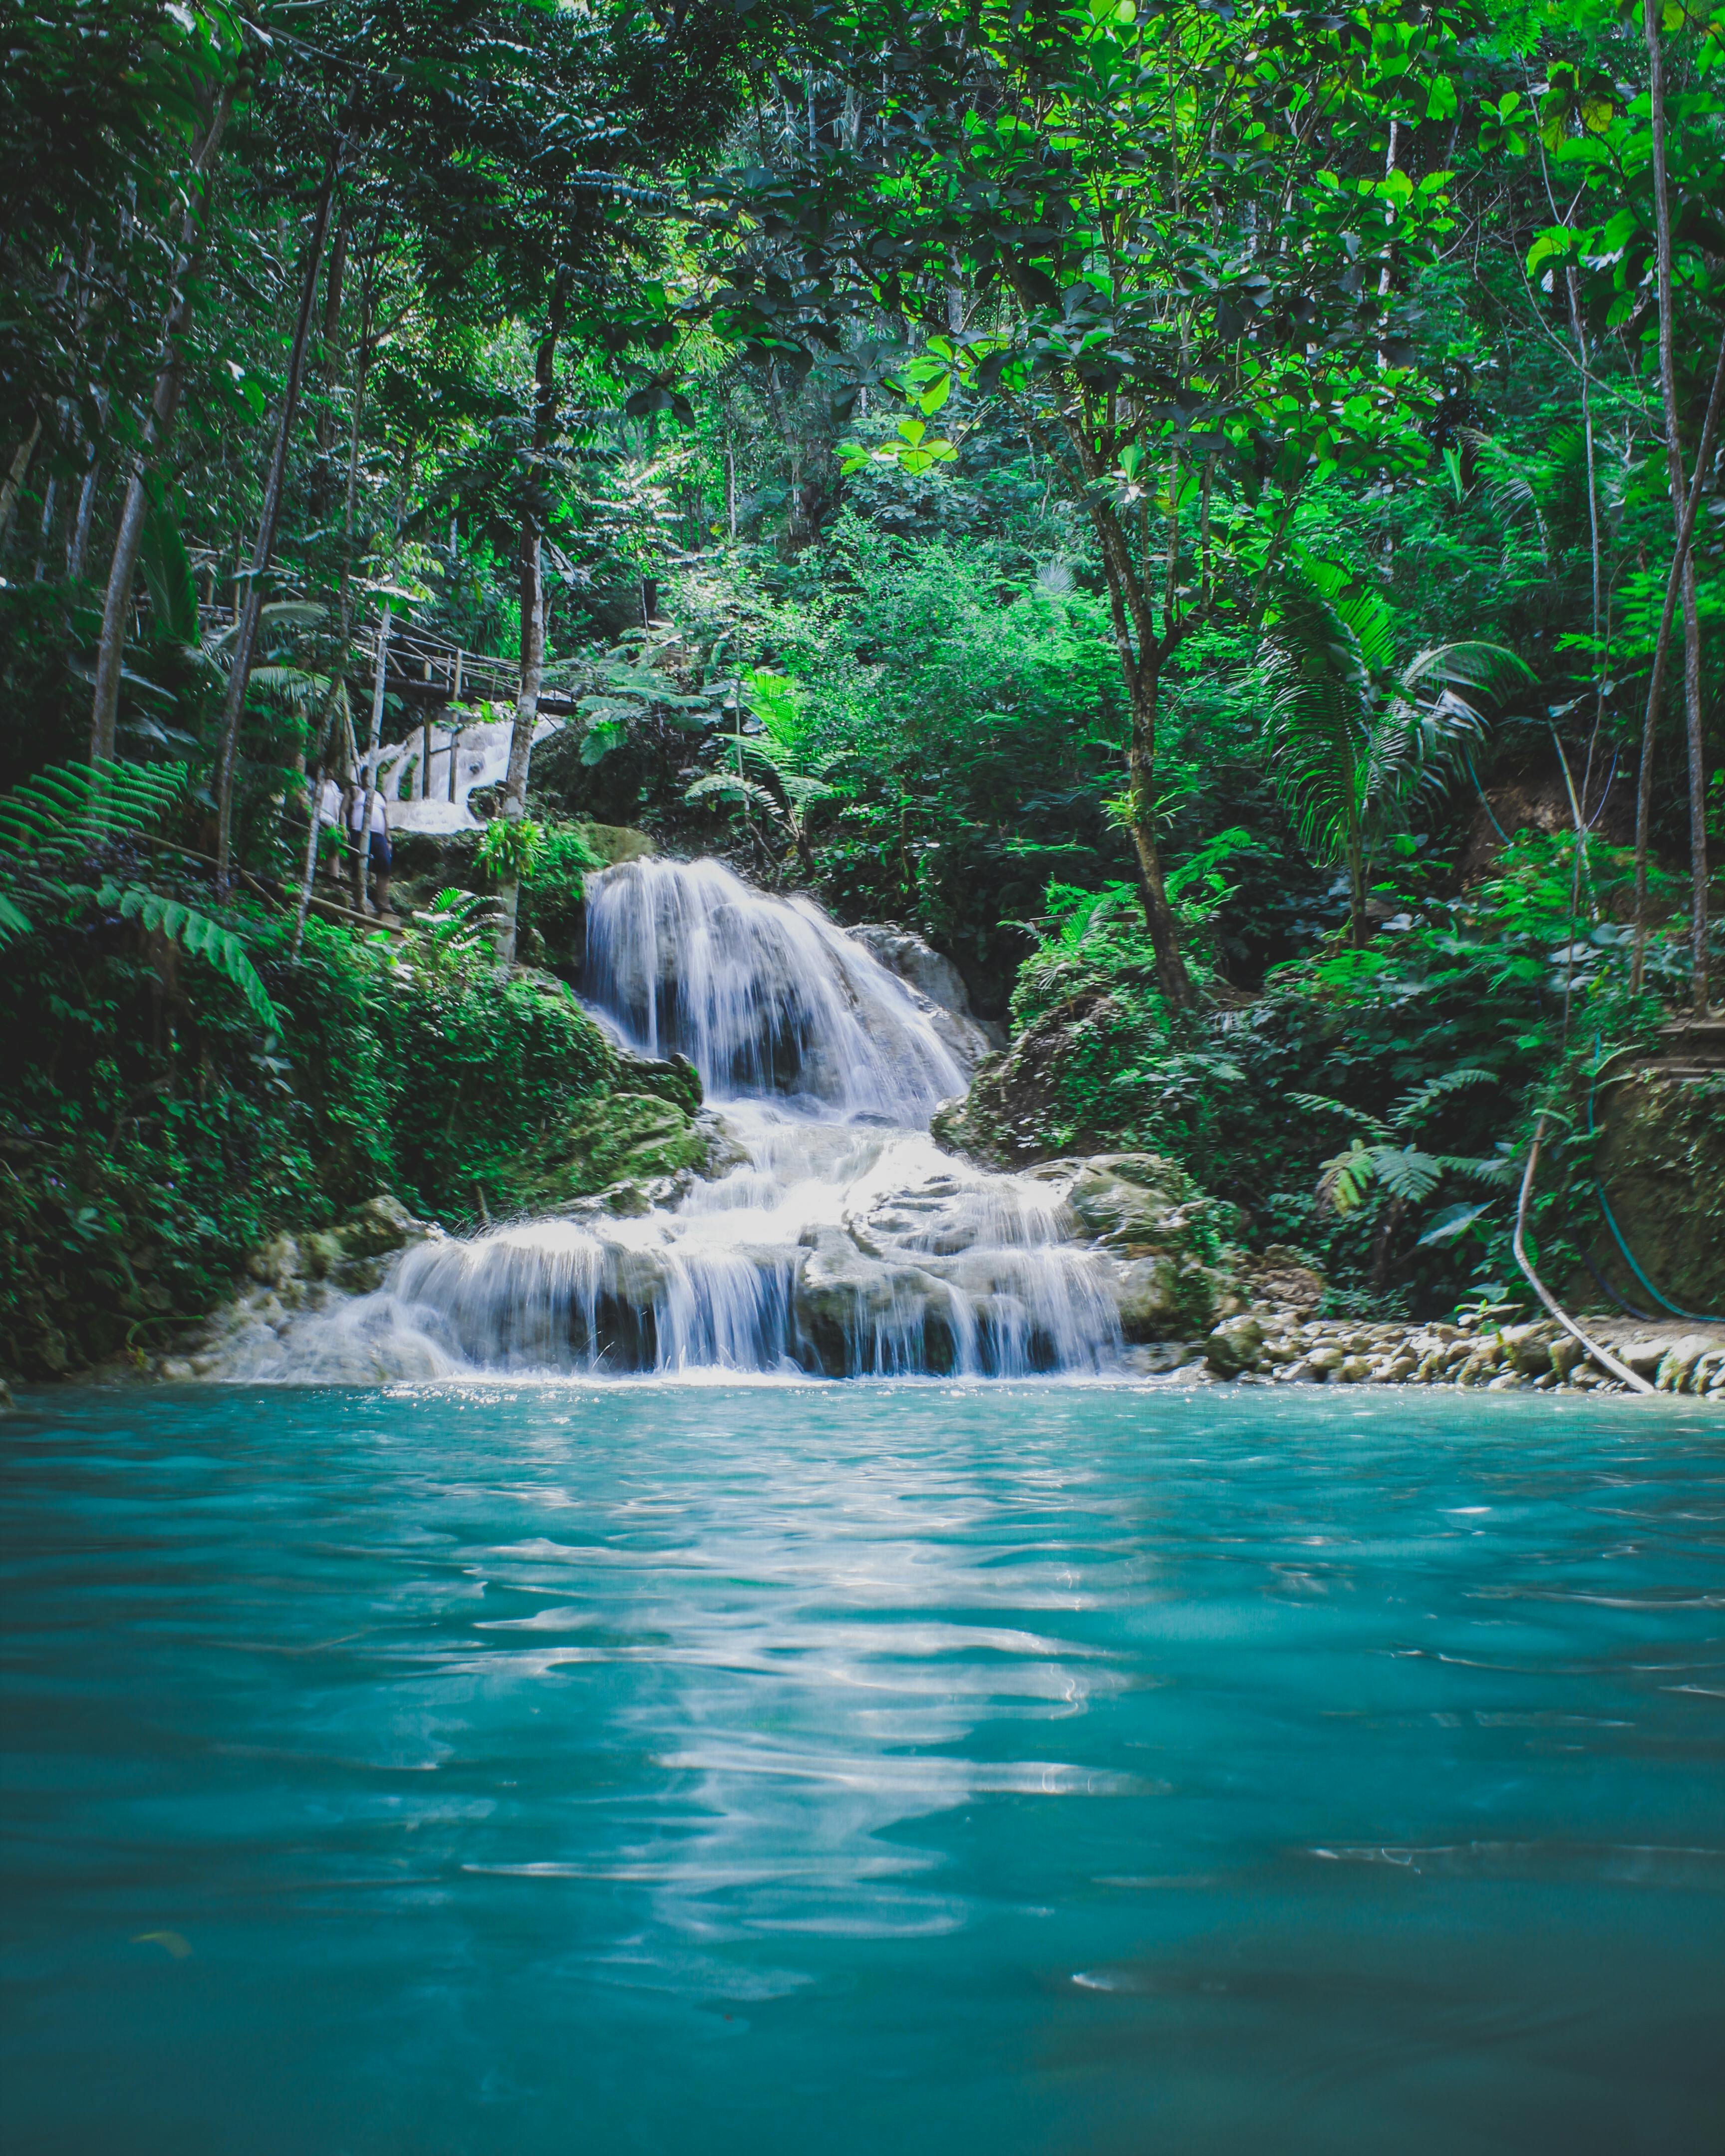 Jungle Photos, Download The BEST Free Jungle Stock Photos & HD Images